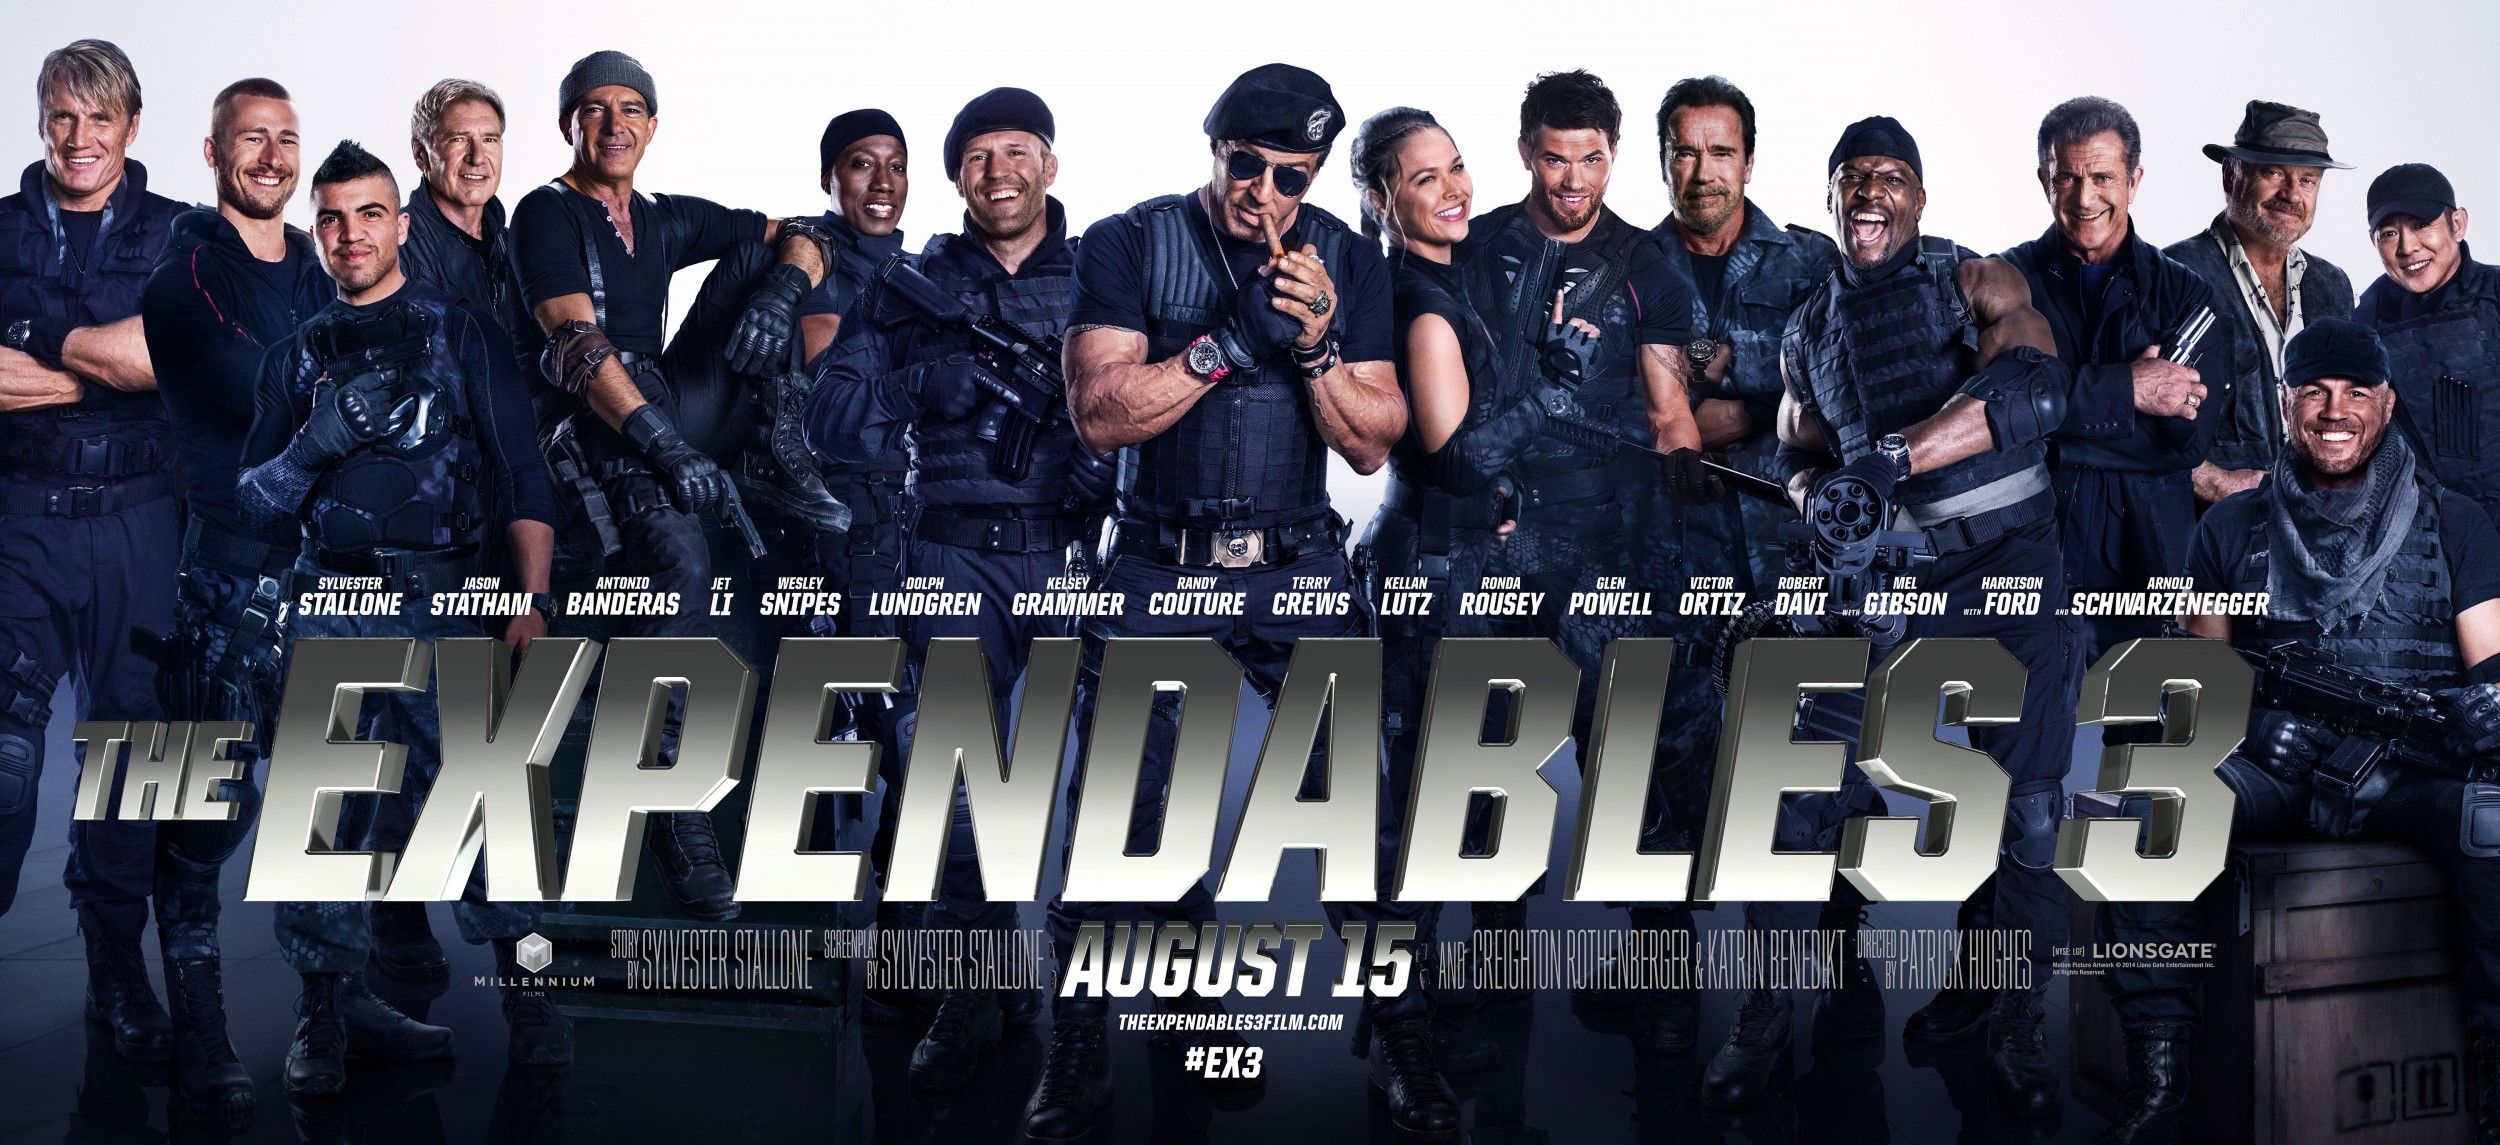 The Expendables 3 cast banner